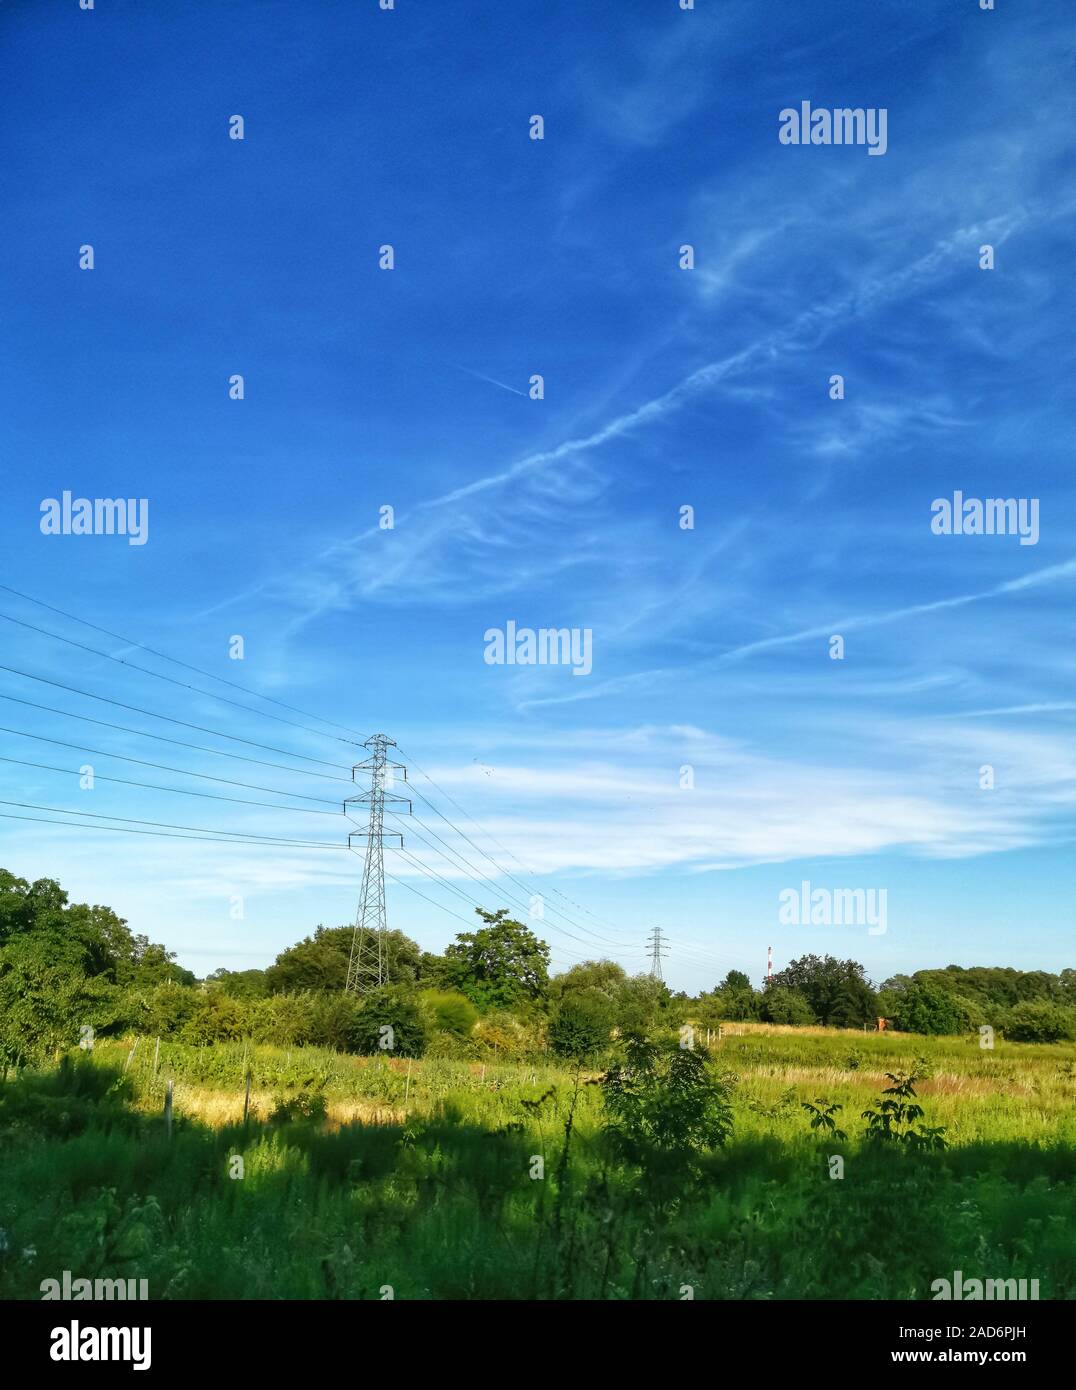 High voltage pylons and lines in a rural landscape against a blue sky. green country landscape on a sunny day. Association of agriculture and industry Stock Photo